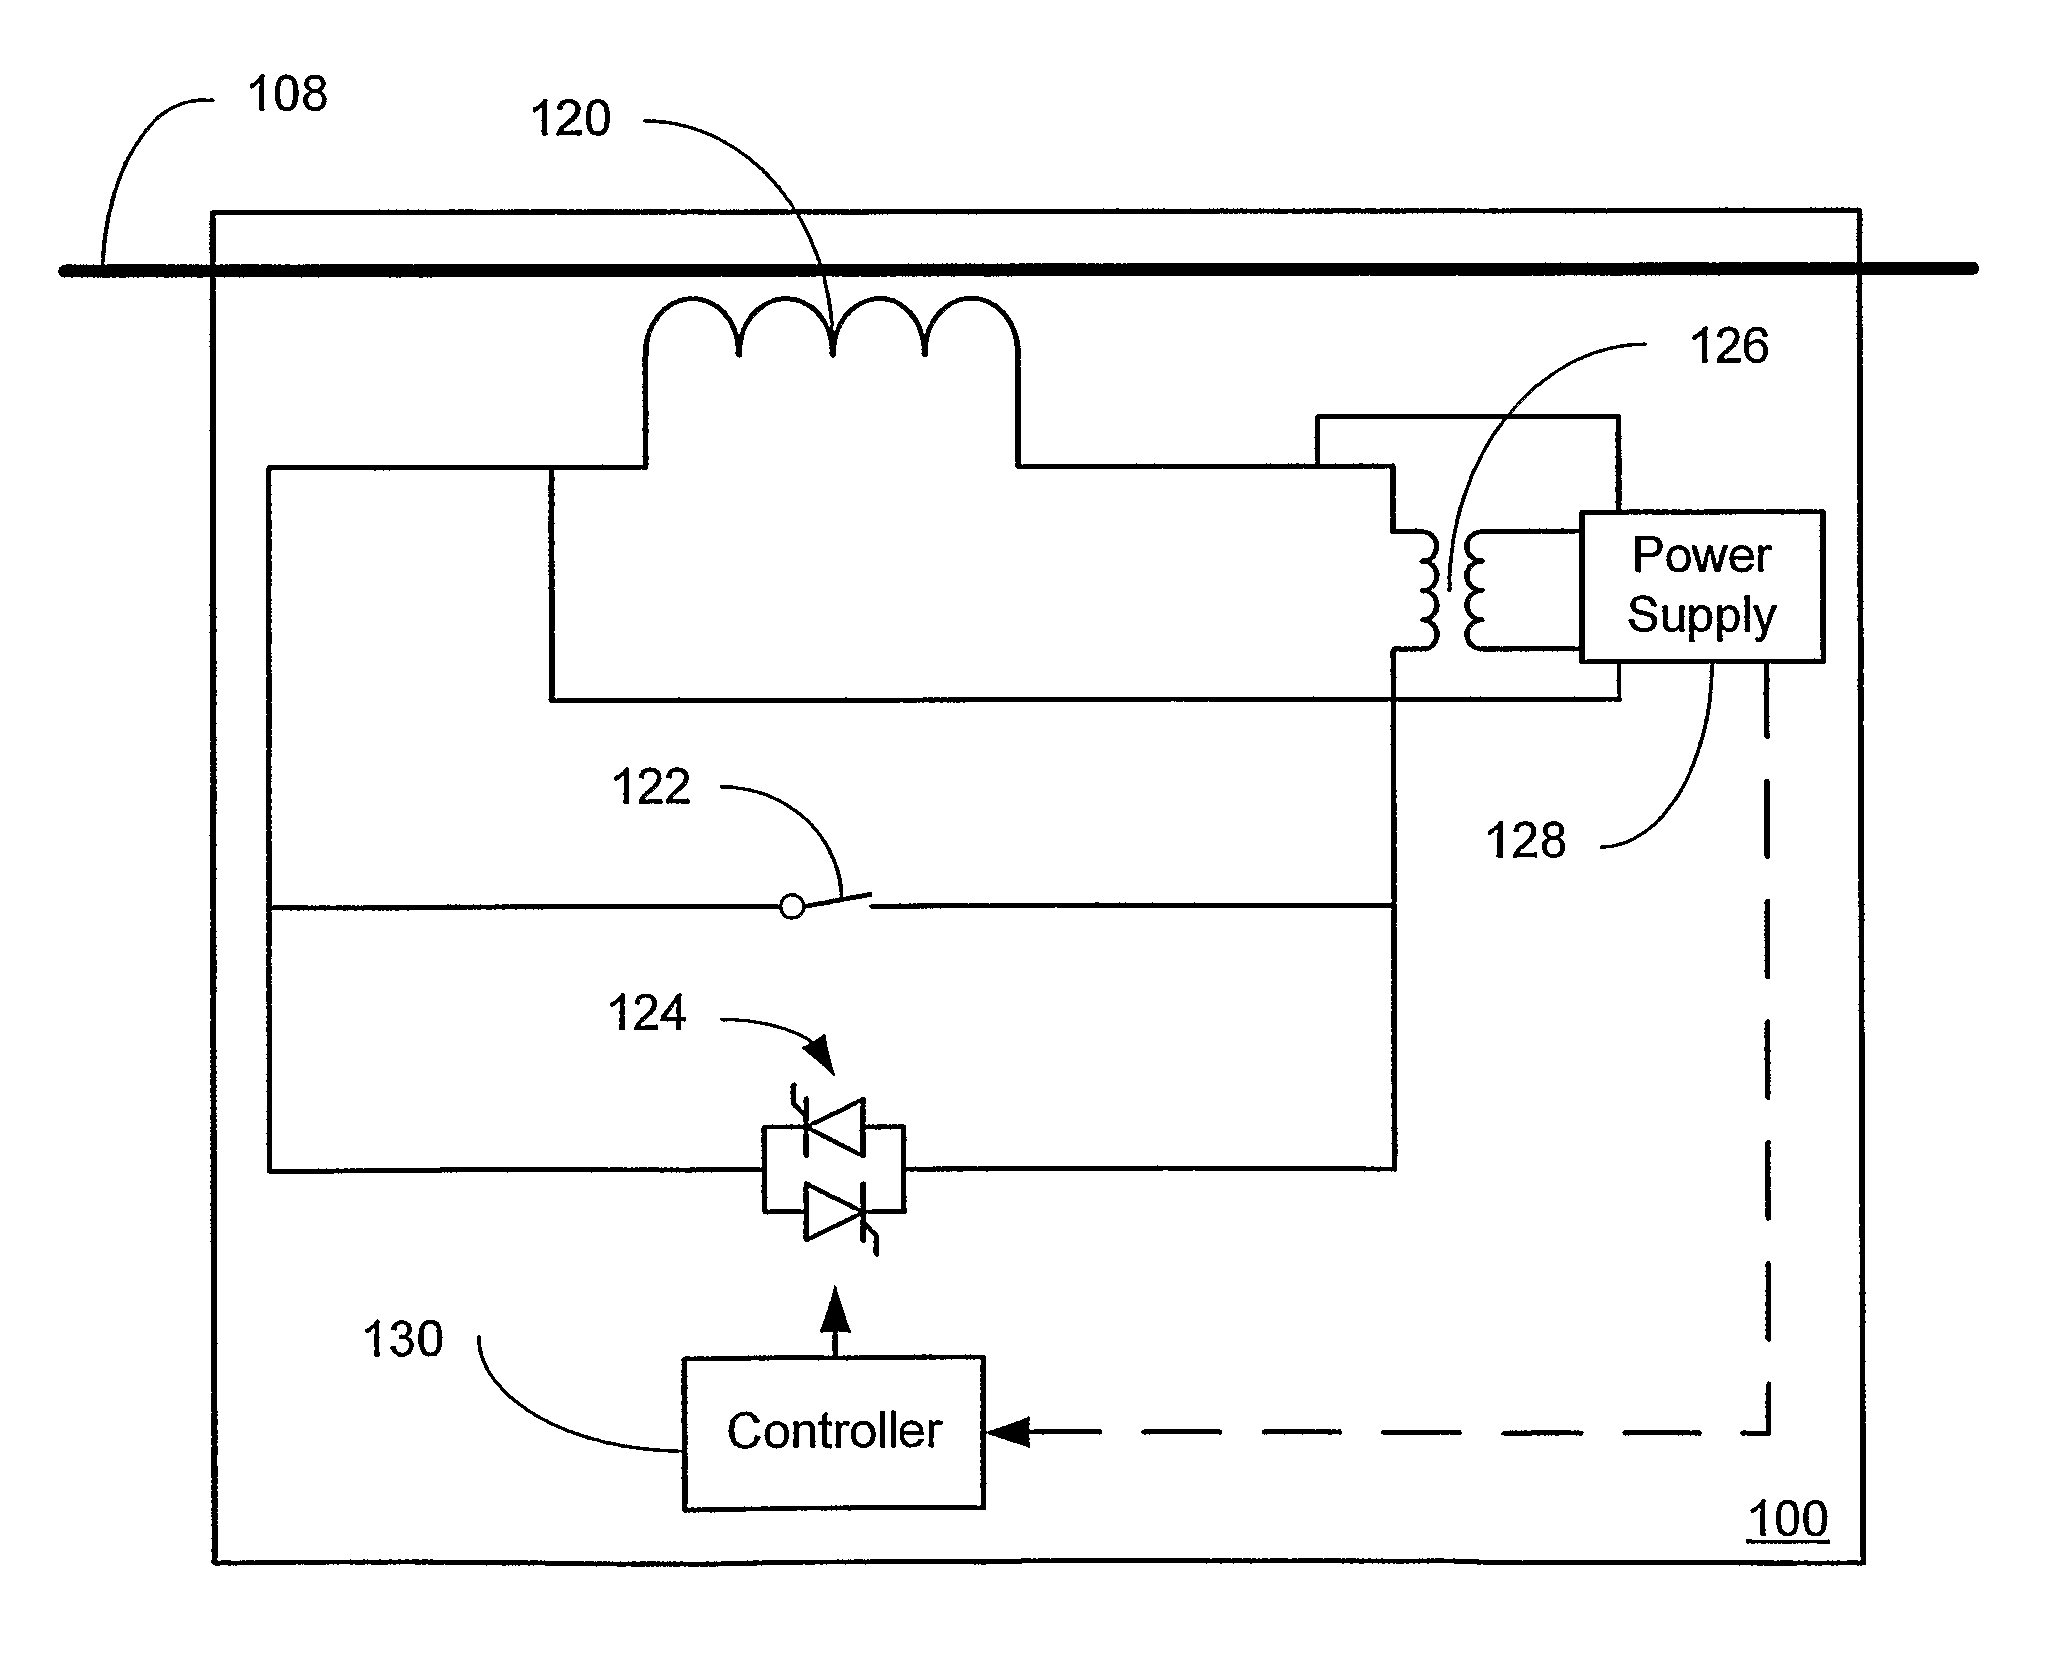 Systems and methods for distributed series compensation of power lines using passive devices